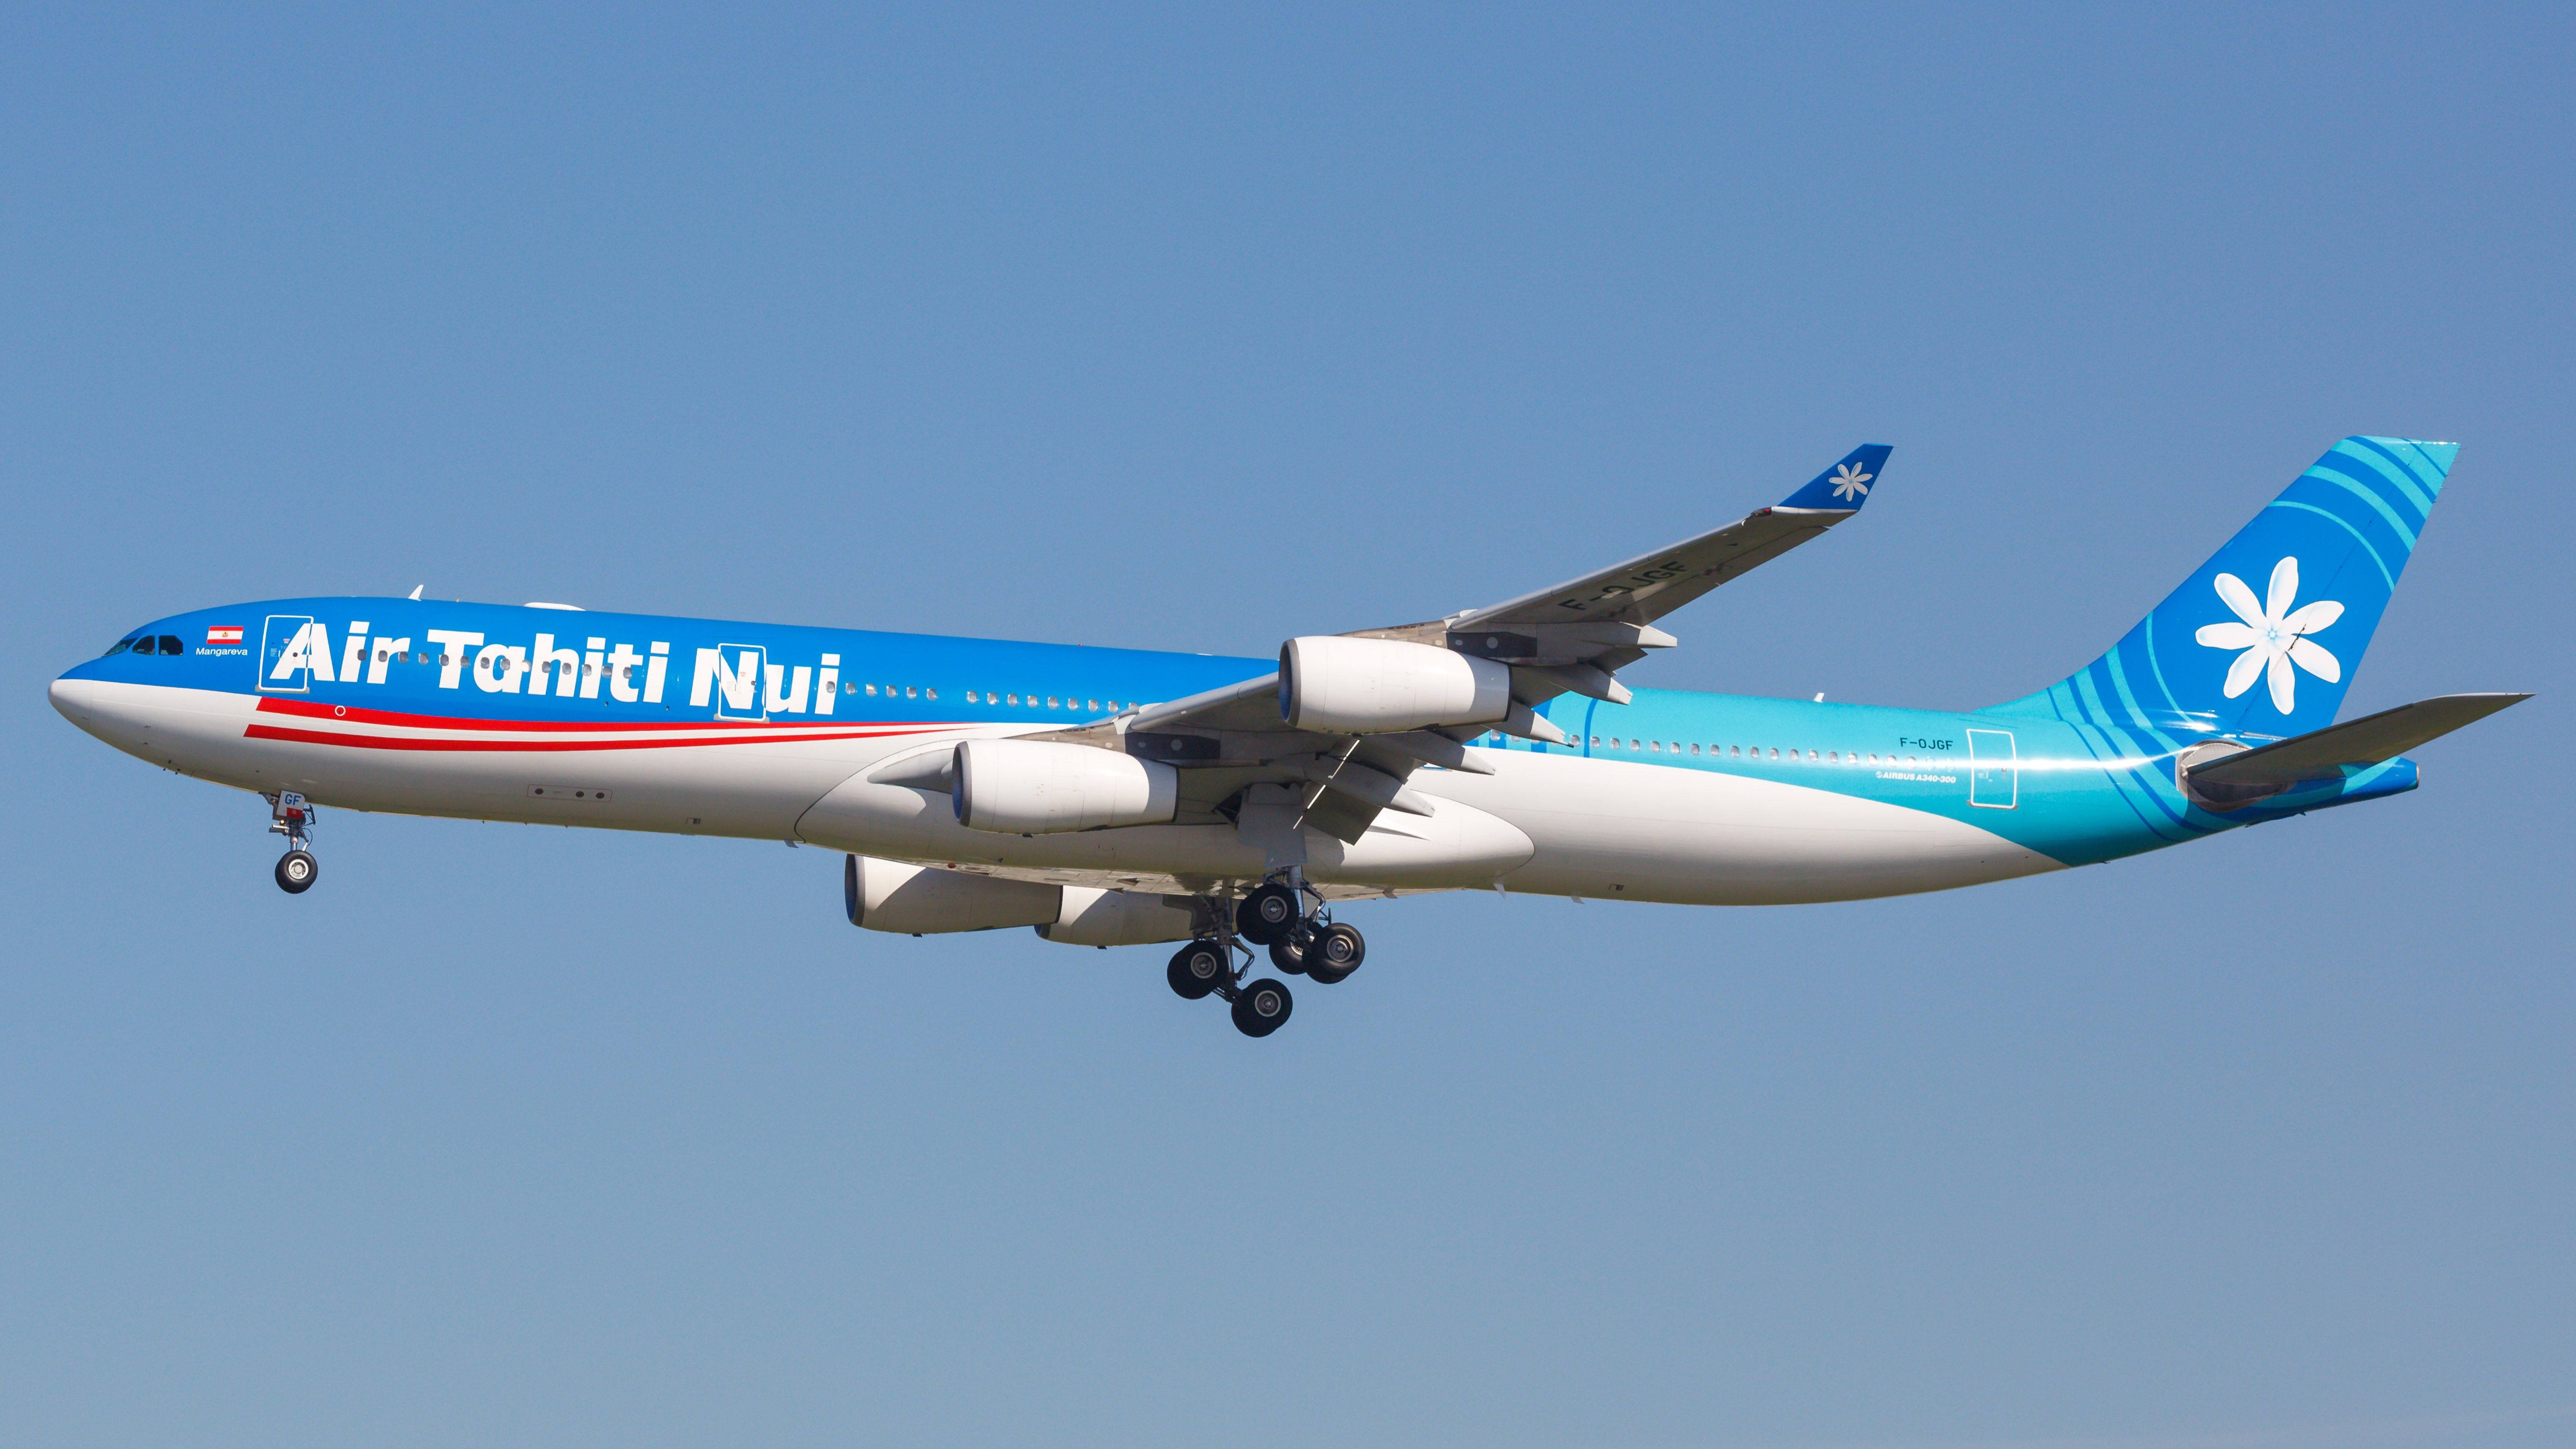 French Polynesian Quadjets: The Story Of Air Tahiti Nui's Airbus A340s